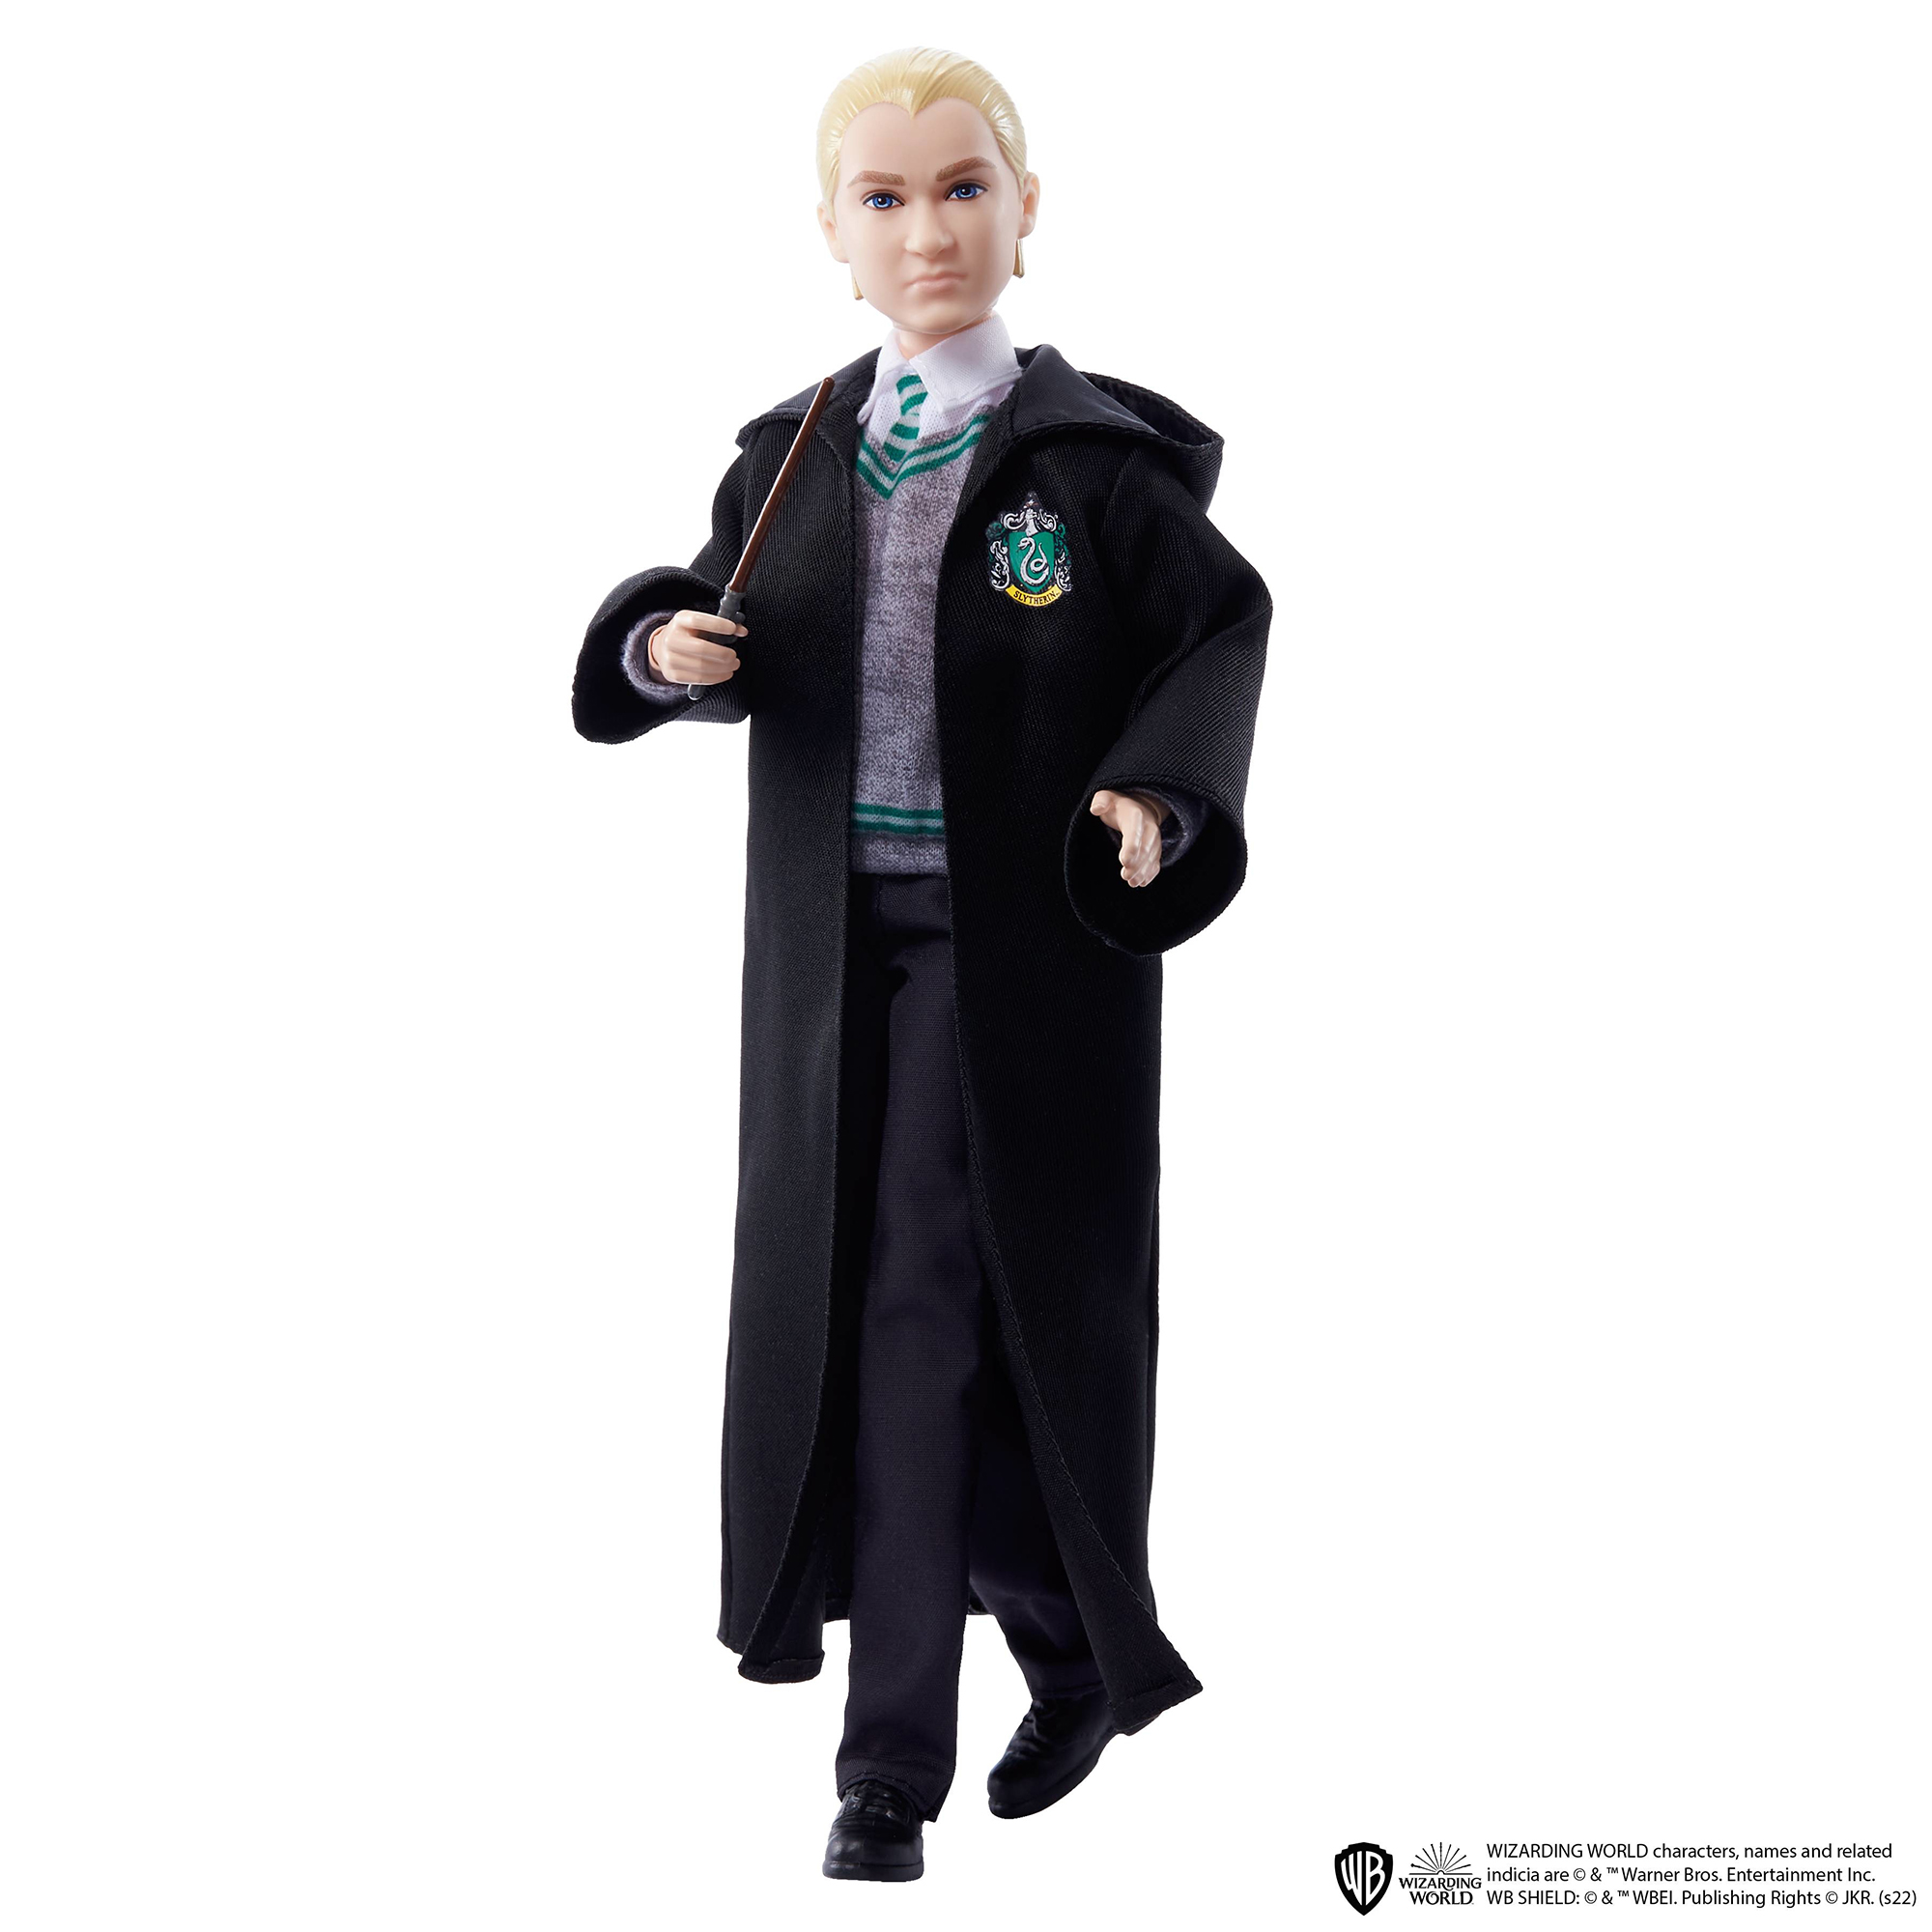 spray Actuator Darling New Harry Potter dolls from Mattel: Draco Malfoy and Luna Lovegood in  school outfits - YouLoveIt.com